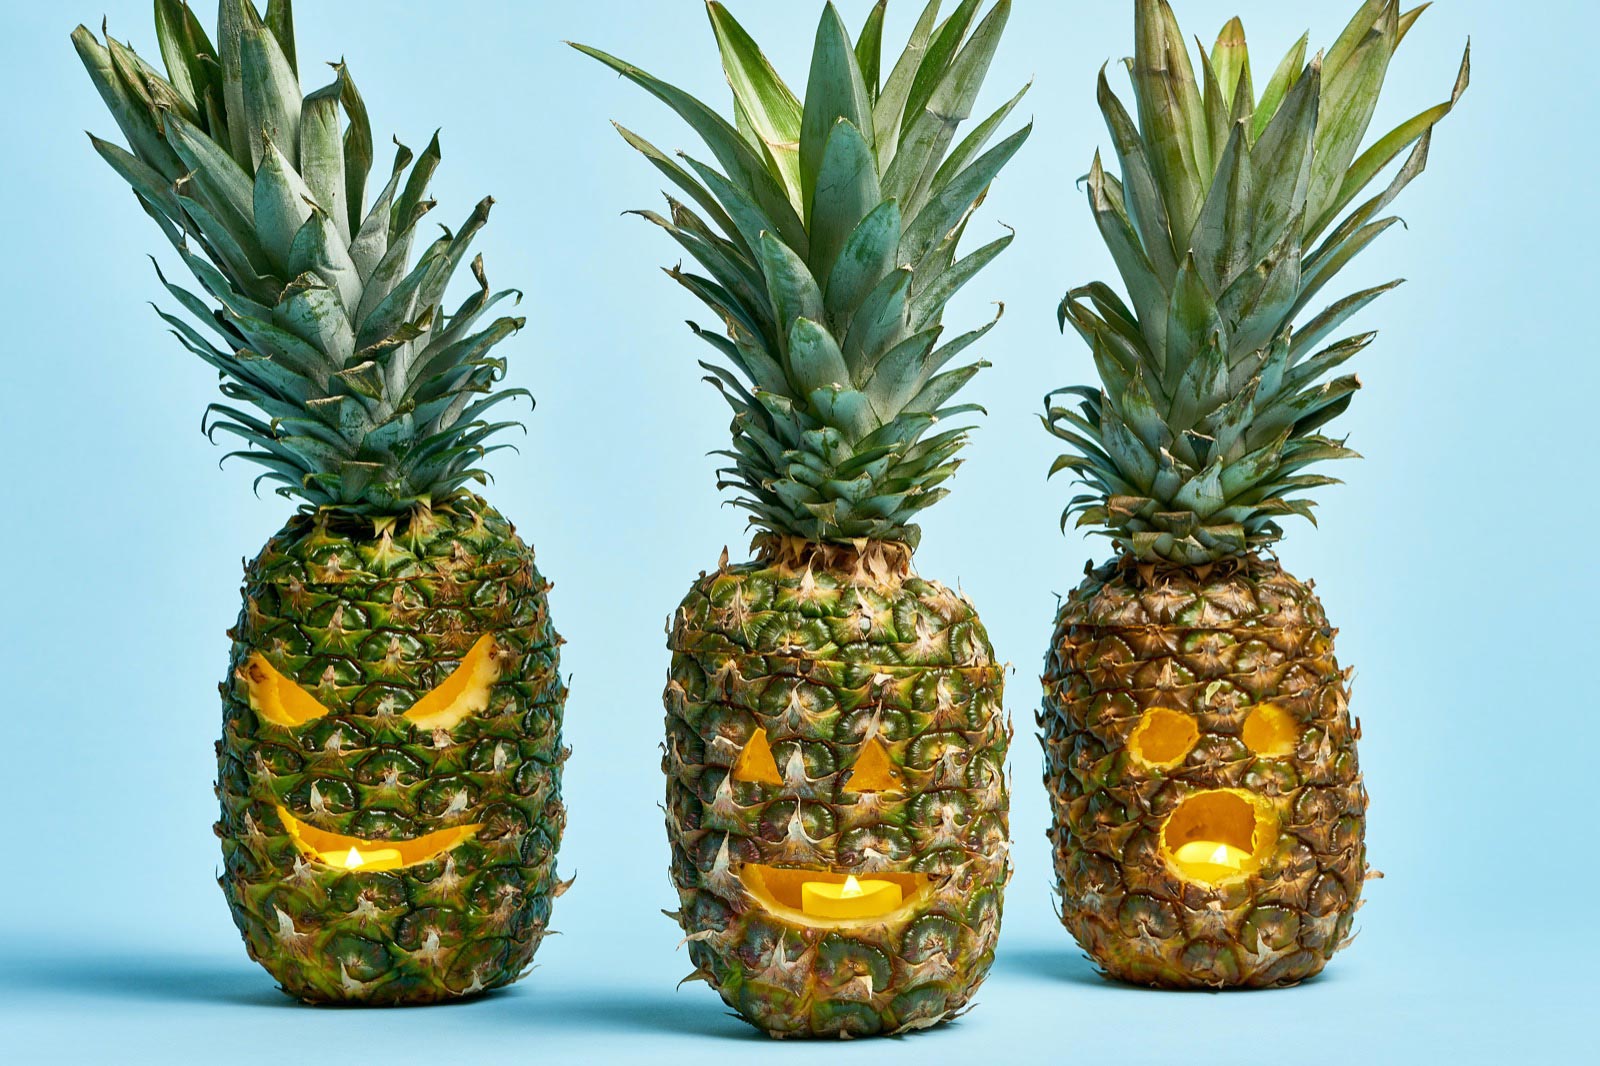 🍓 Sorry, But If You Can’t Pass This Plural Word Test, You Can Never Have Fruits Again Pineapple